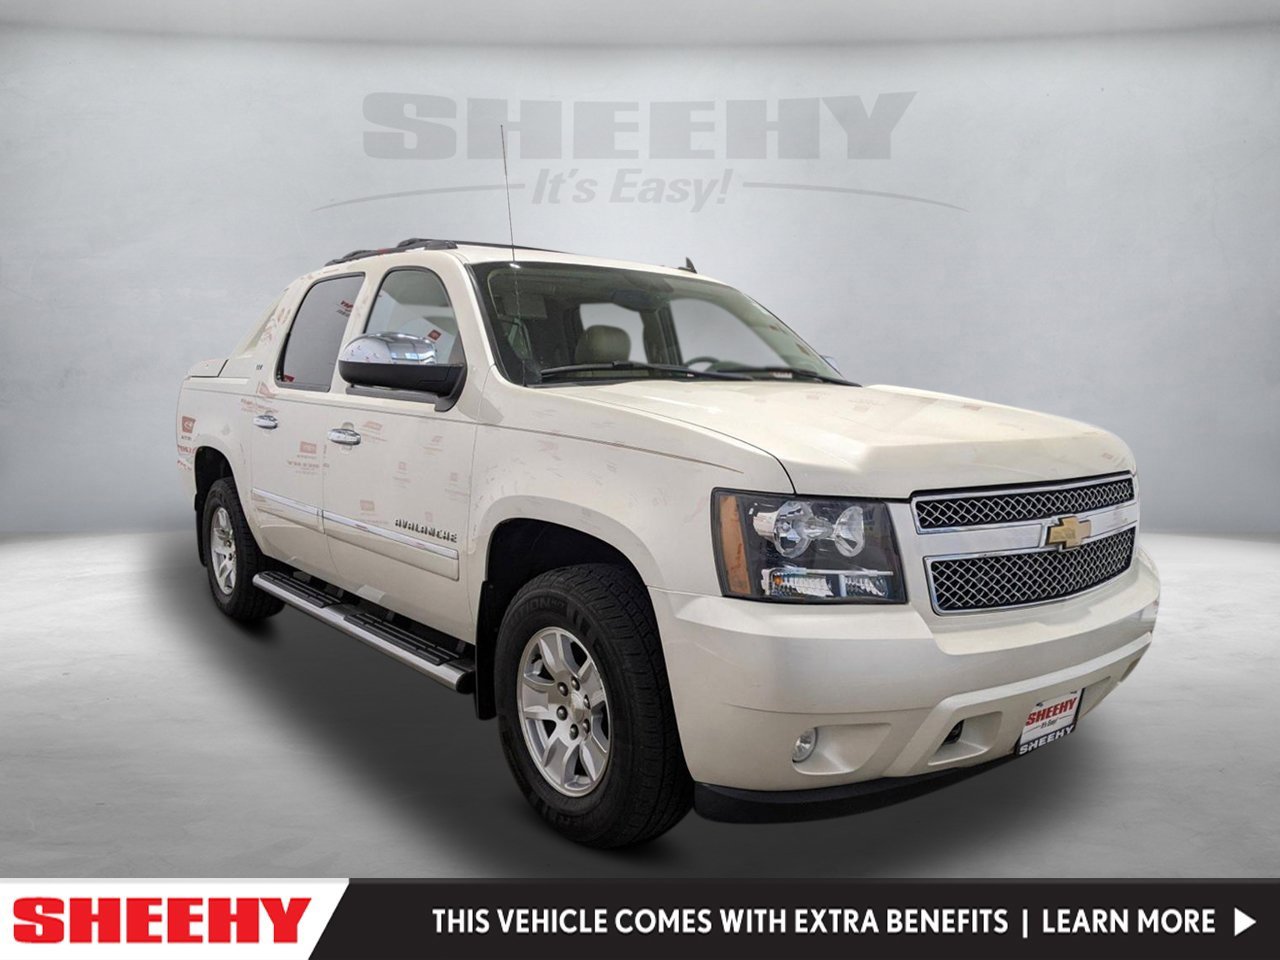 Used Chevrolet Avalanche for Sale Near Me in Baltimore, MD - Autotrader